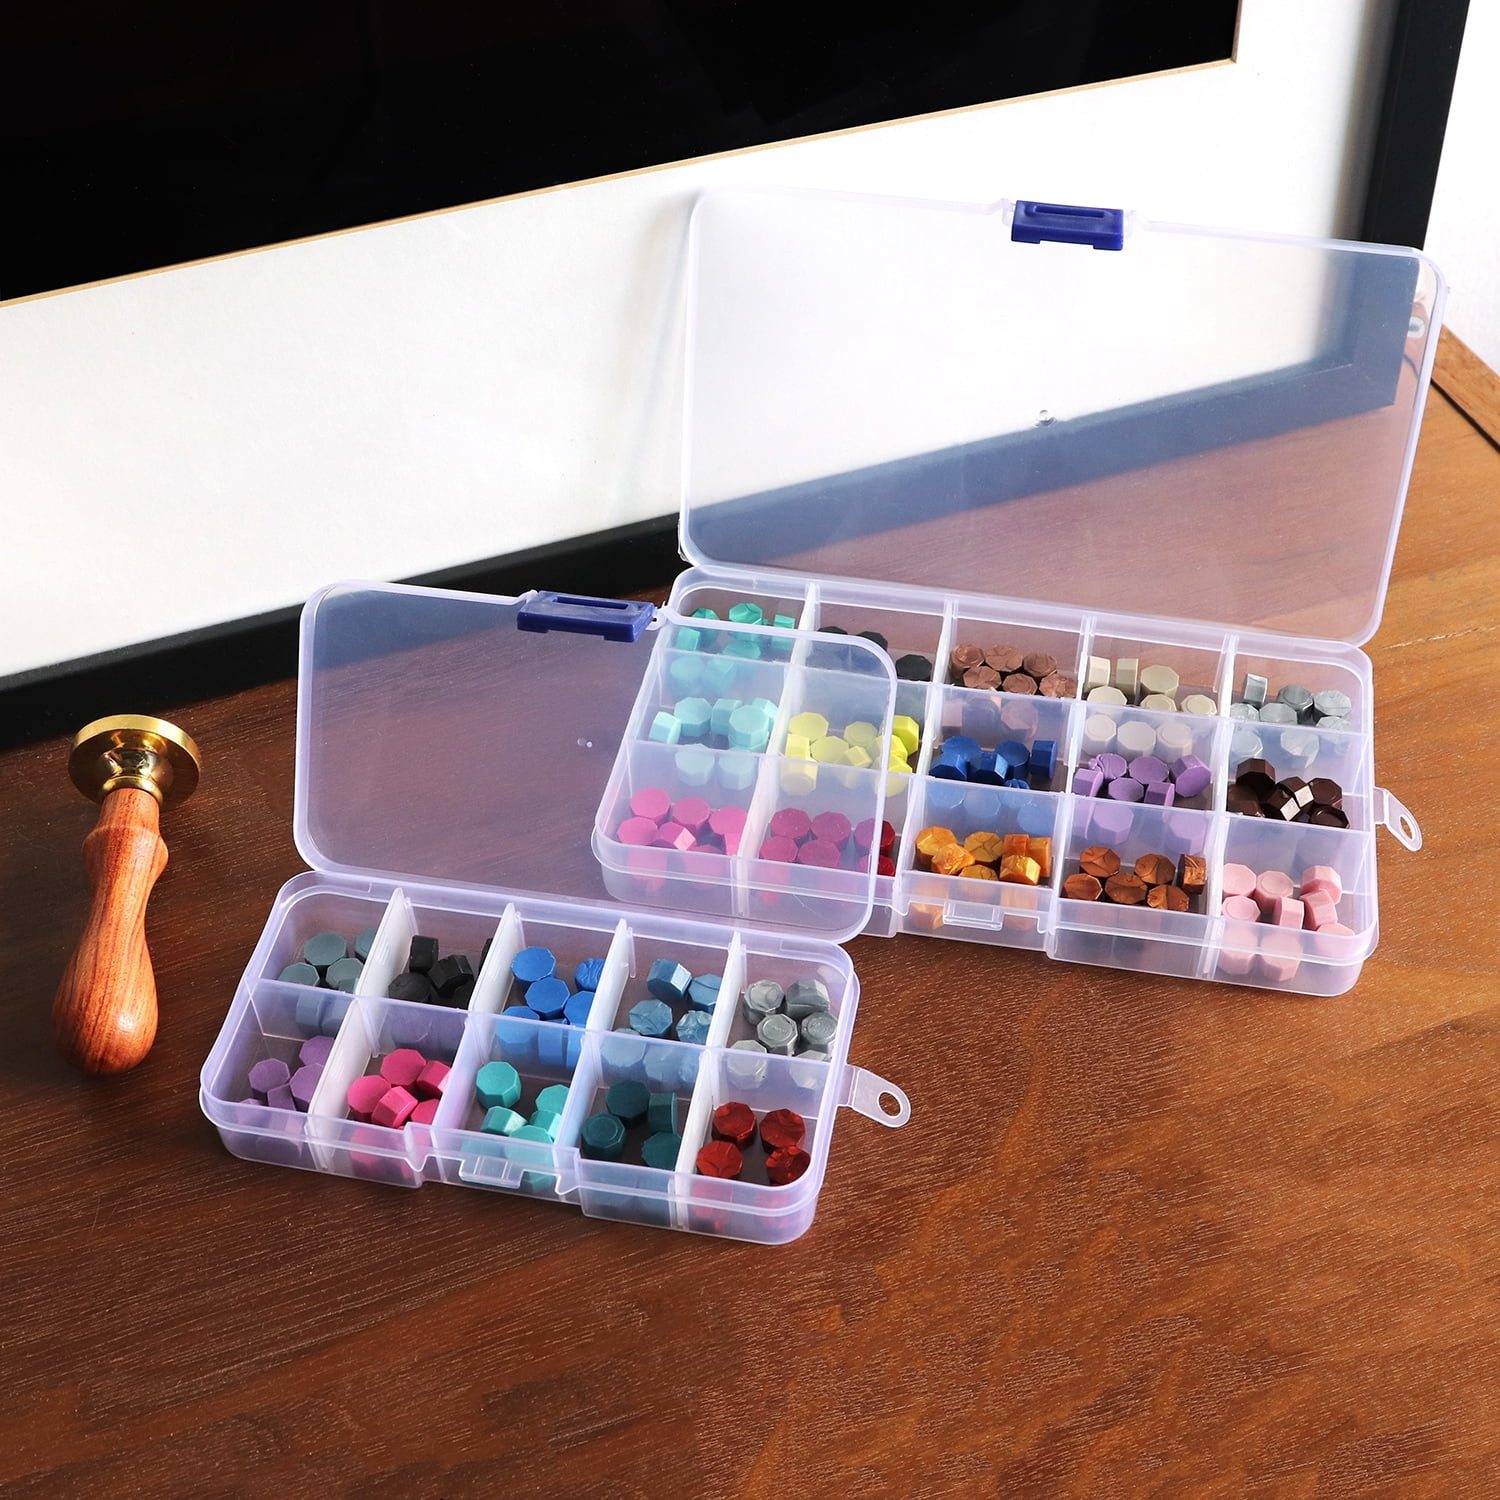 Yirtree 2/3 Layers Plastic Organizer Container Storage Box Adjustable Divider Removable Grid Compartment for Jewelry Beads Earring Tool Fishing Hook